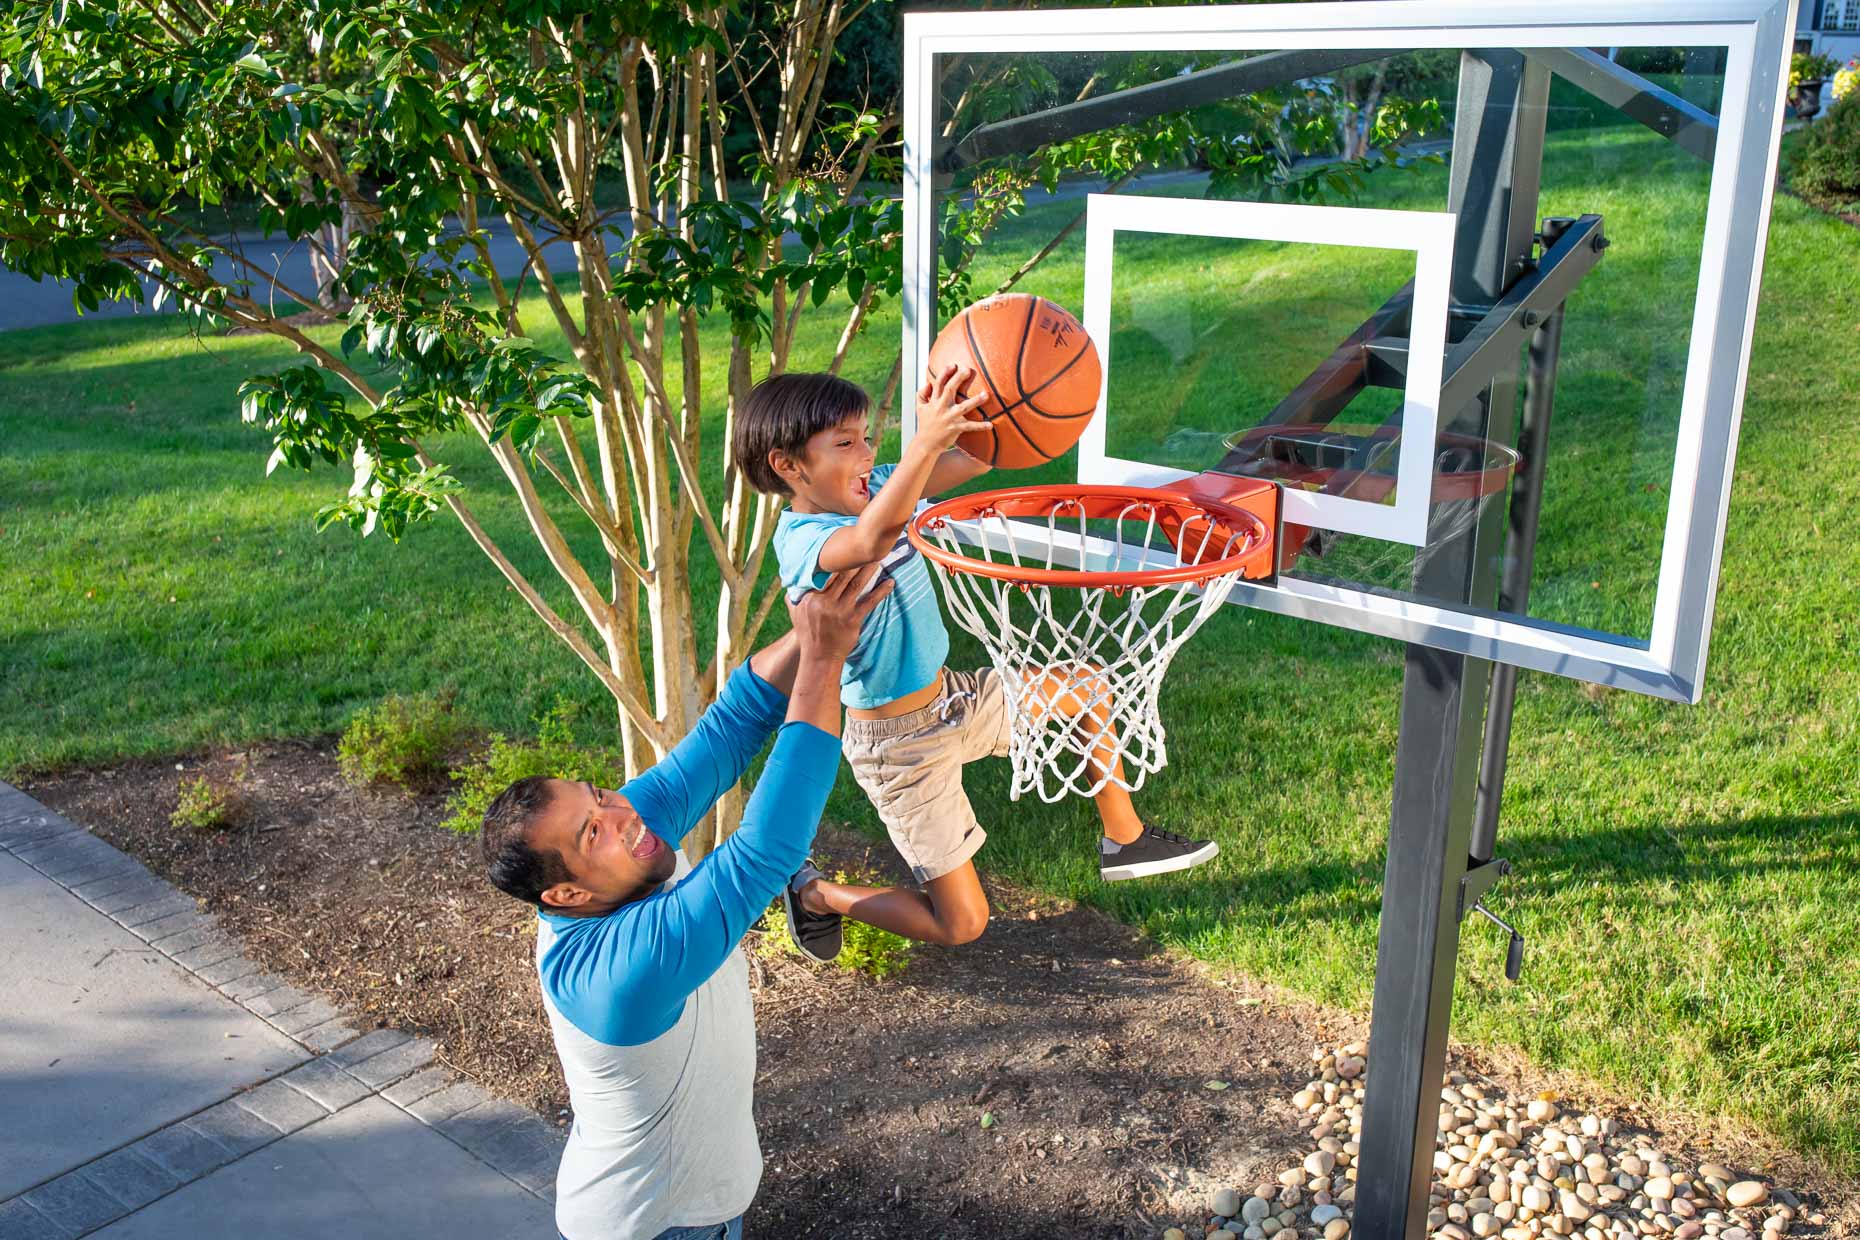 200922_Robert_Holland_father lifts son to dunk a basketball in driveway